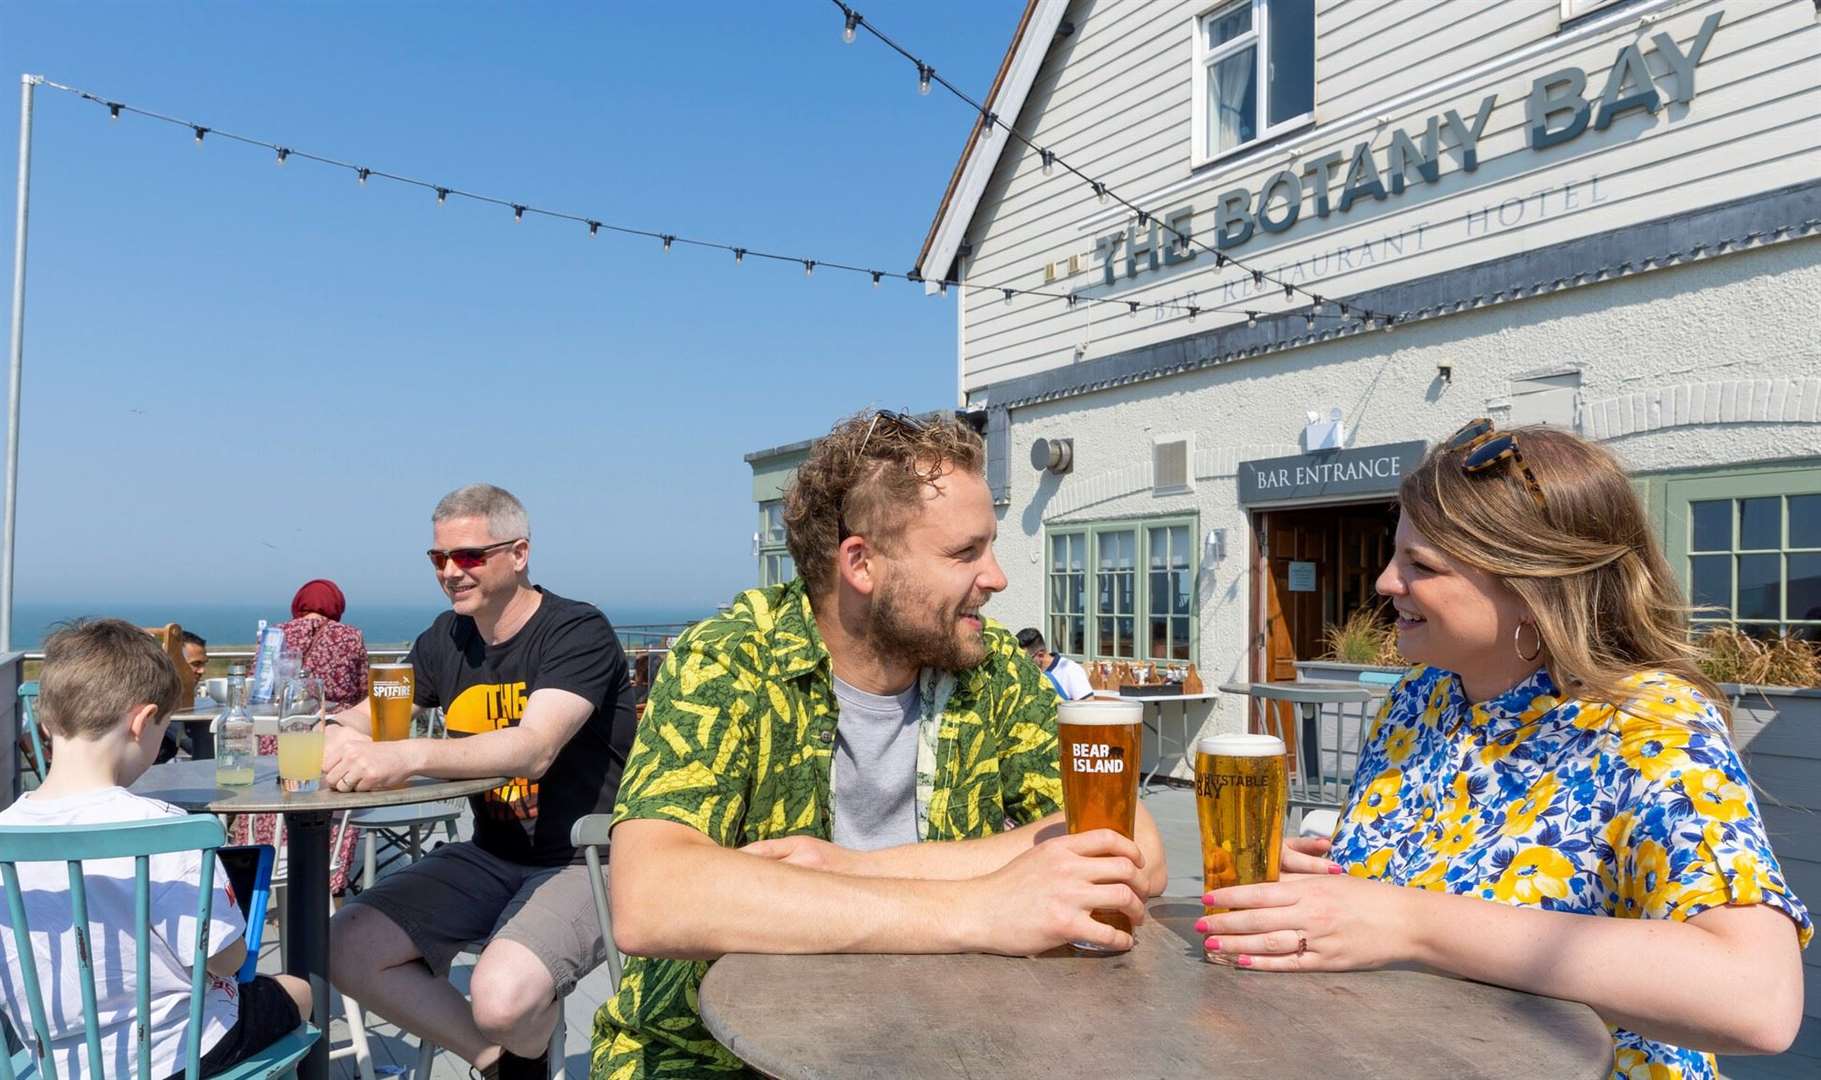 Enjoy views of Botany Bay from this clifftop pub. Picture: Shepherd Neame